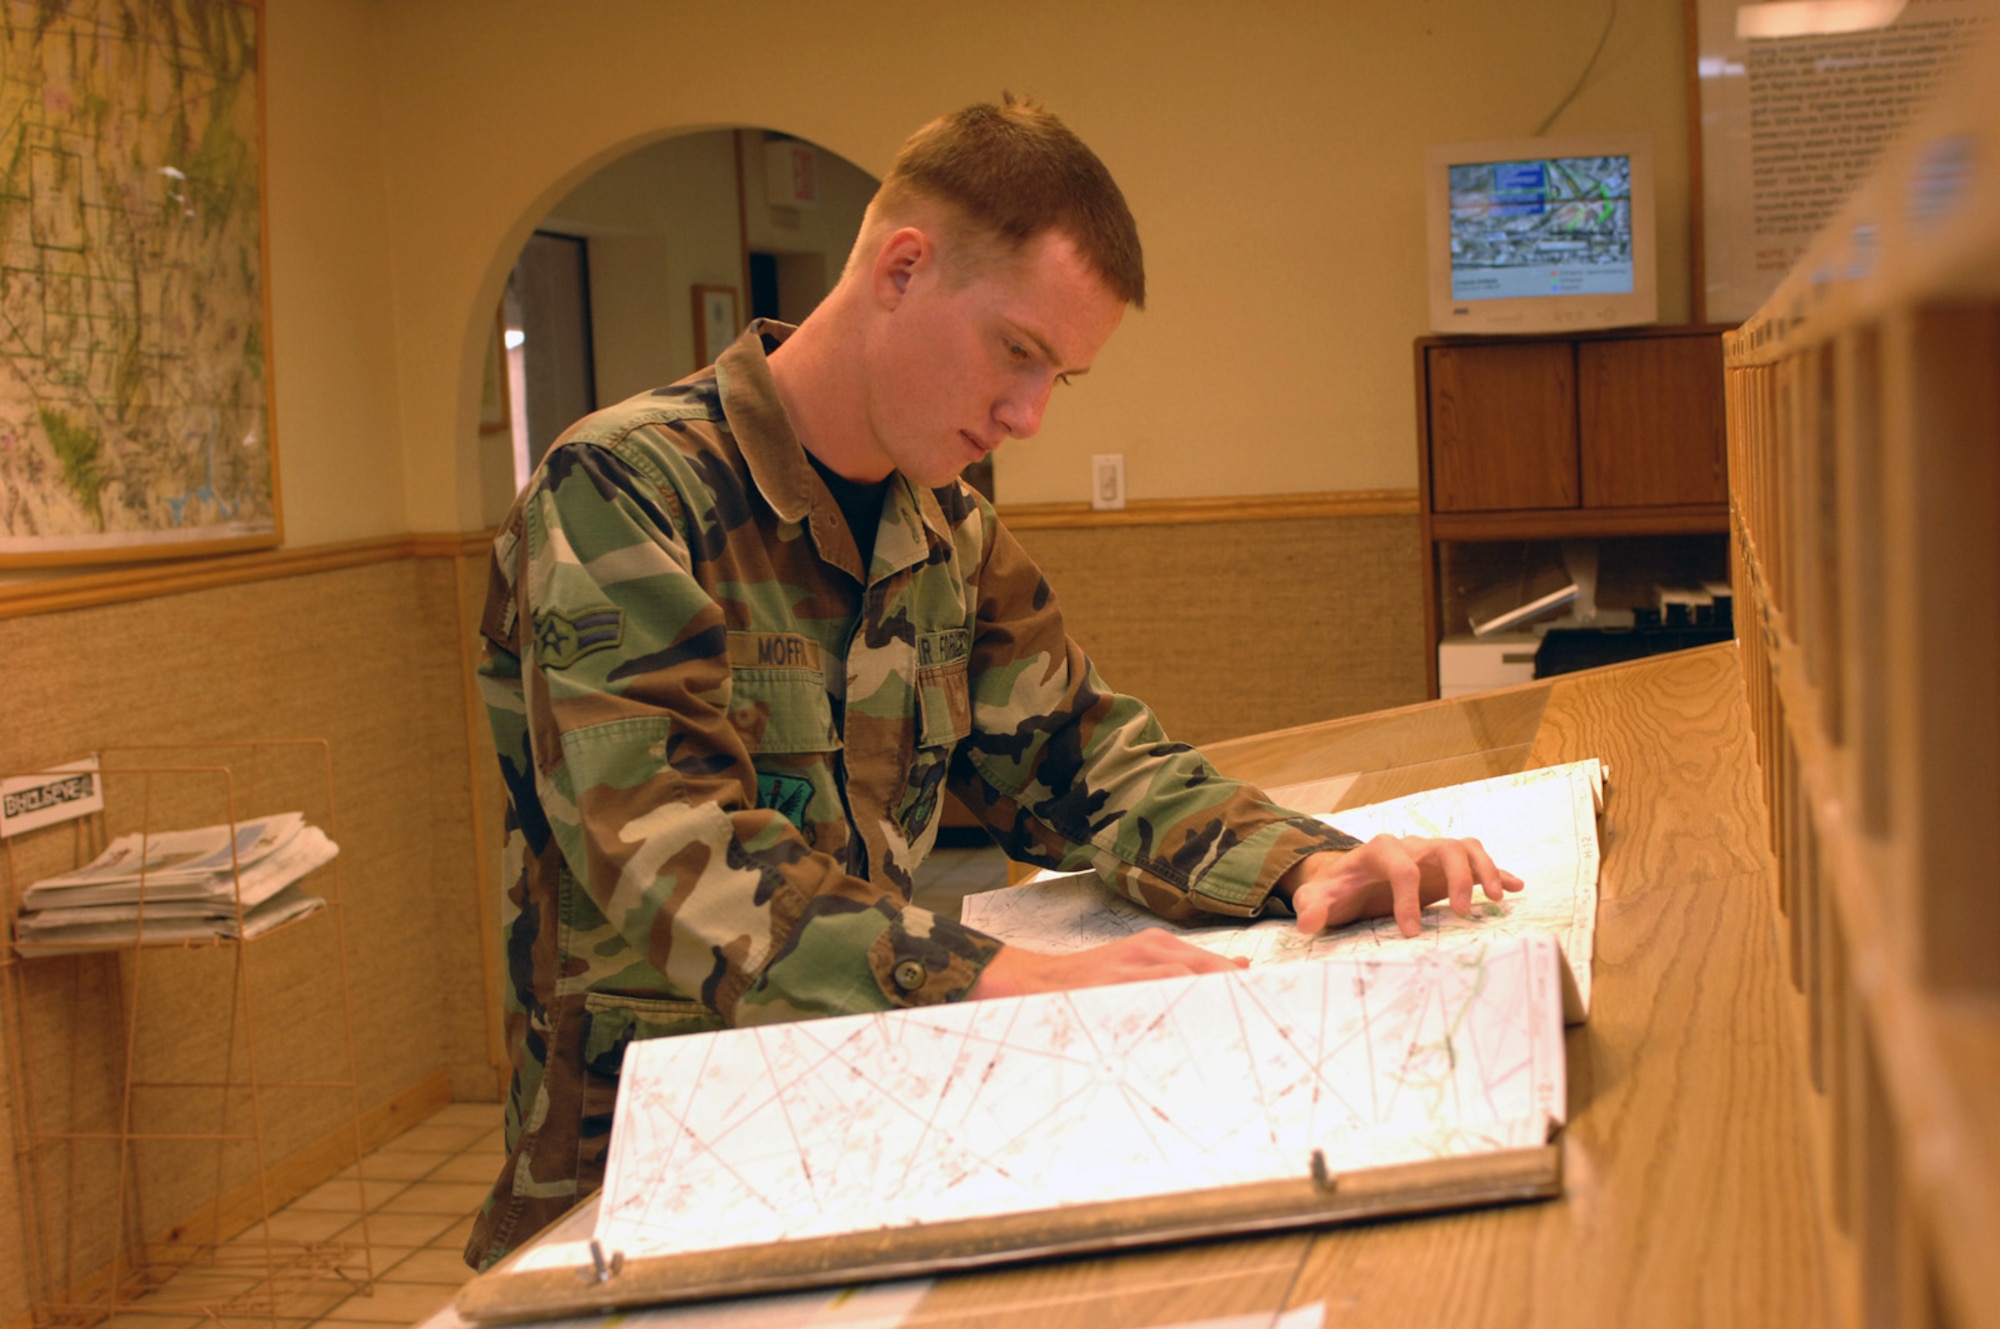 Airman 1st Class Sean Moffit, 57th Operations Support Squadron, Airfield Management, looks at the map to verify the route of the flight. (U.S. Air Force Photo by Senior Airman Jason Huddleston)